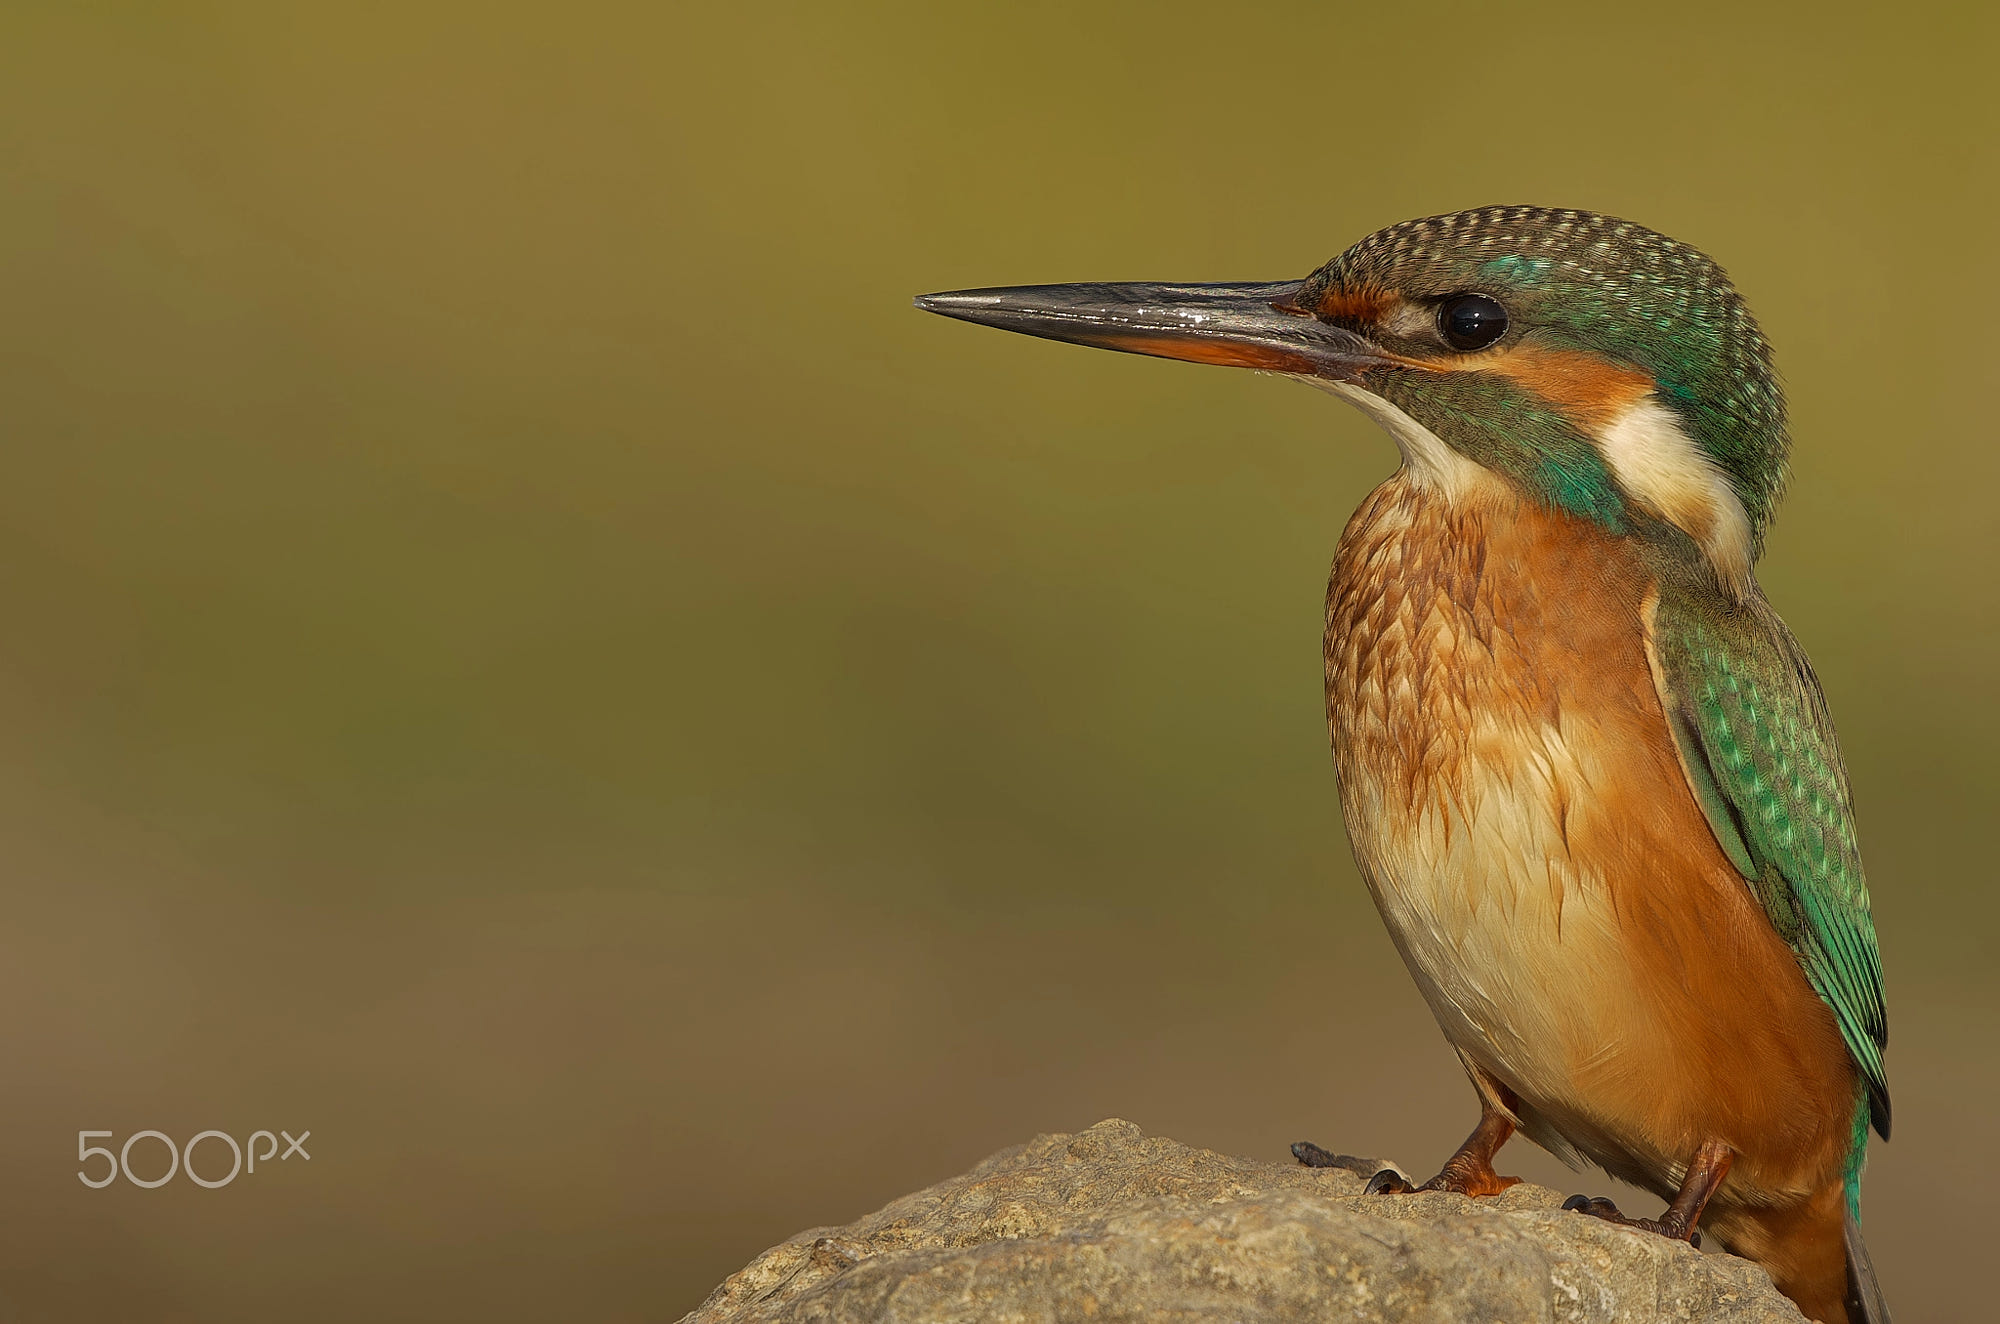 Alcedo atthis... by Ogun Caglayan Turkay on 500px.com